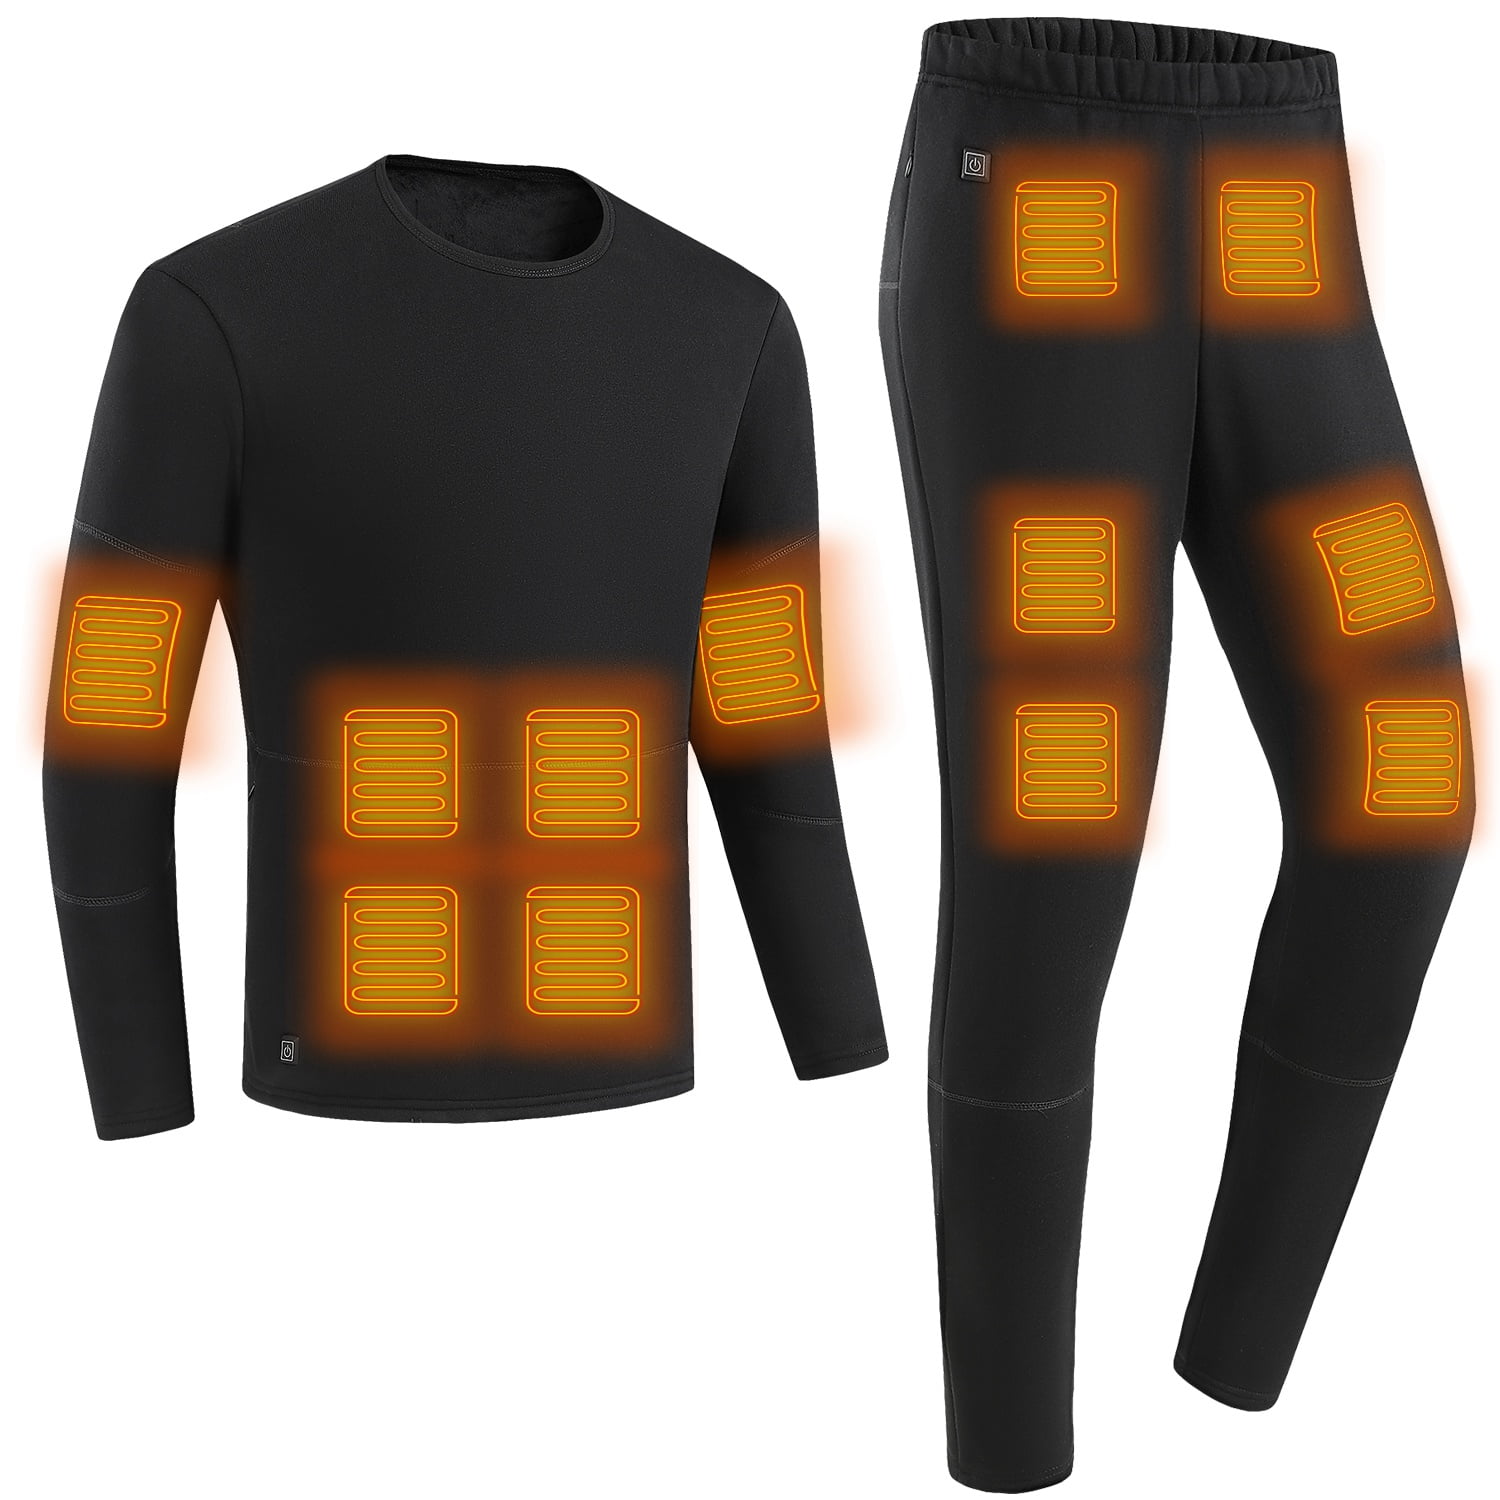 Heated Underwear for Men, iMounTEK Heated Thermal Underwear Set, Electric  Heated Clothing Black Heated Top Pants for Men with 28 Heating Zones 3  Heating Modes - S 